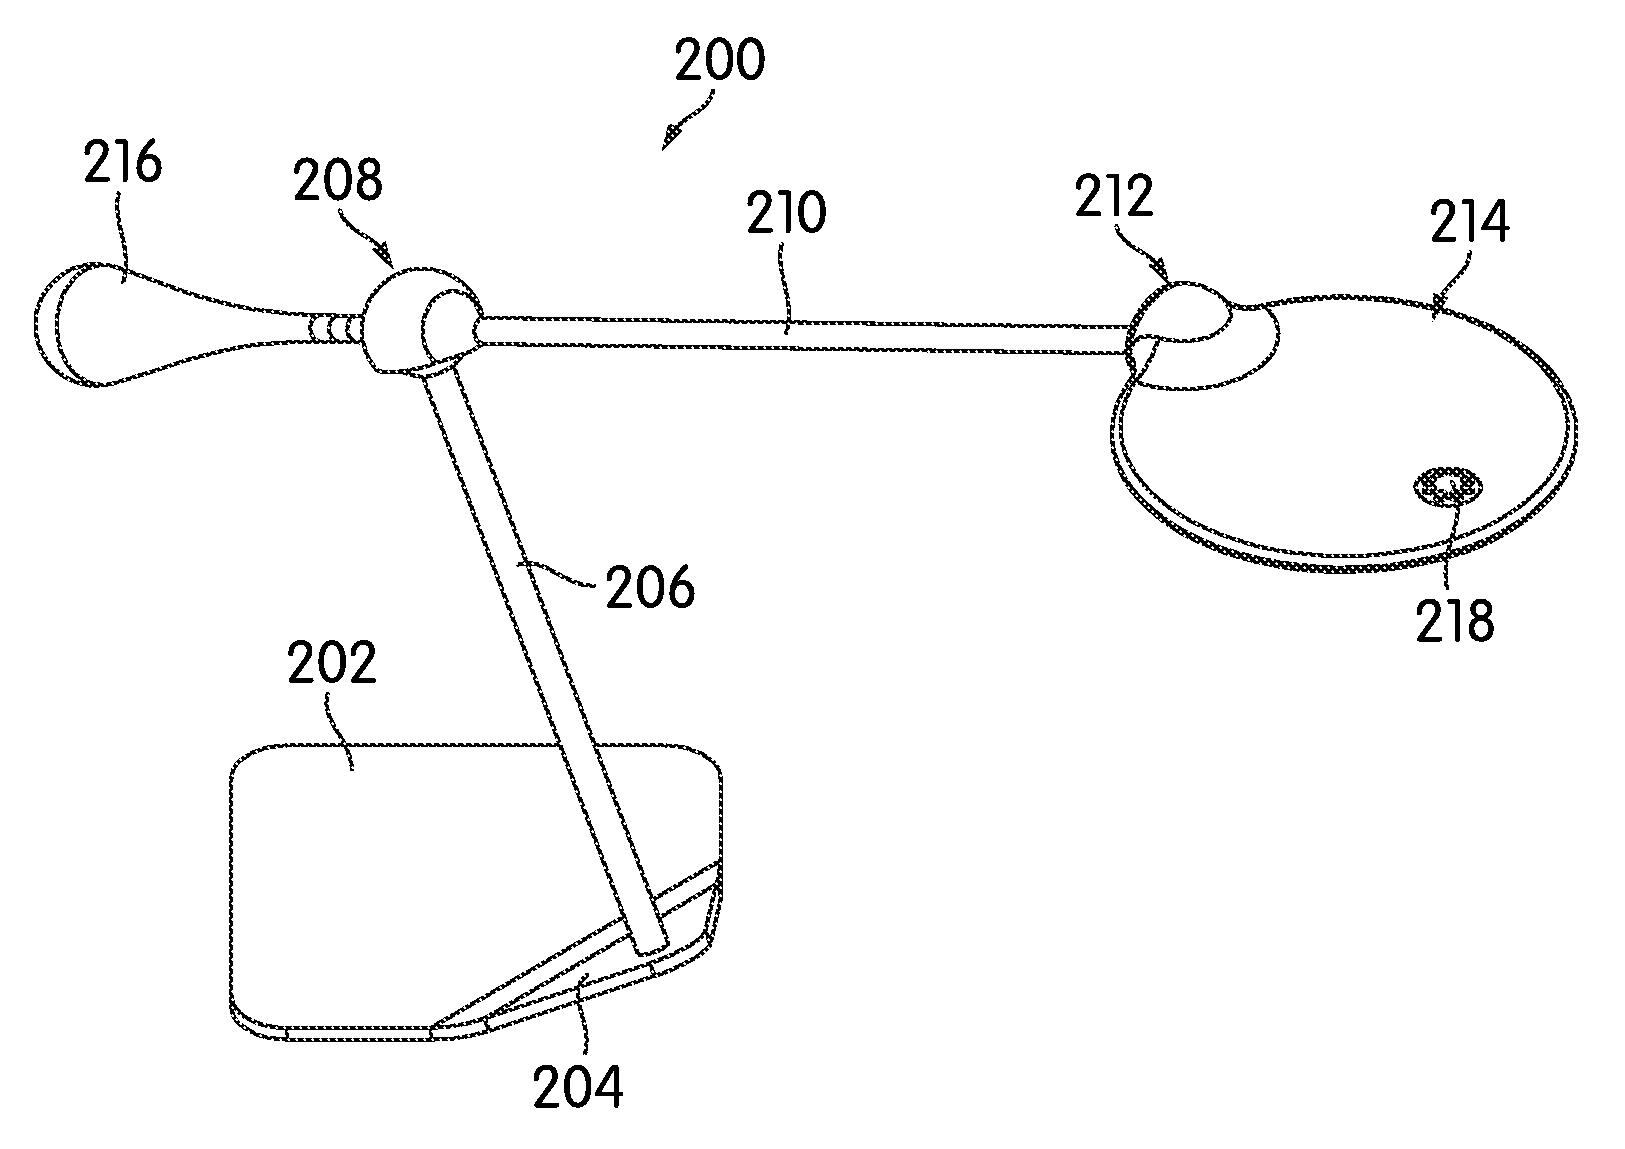 Electrically Conductive Ball Joints and Lighting Fixtures using the Joints